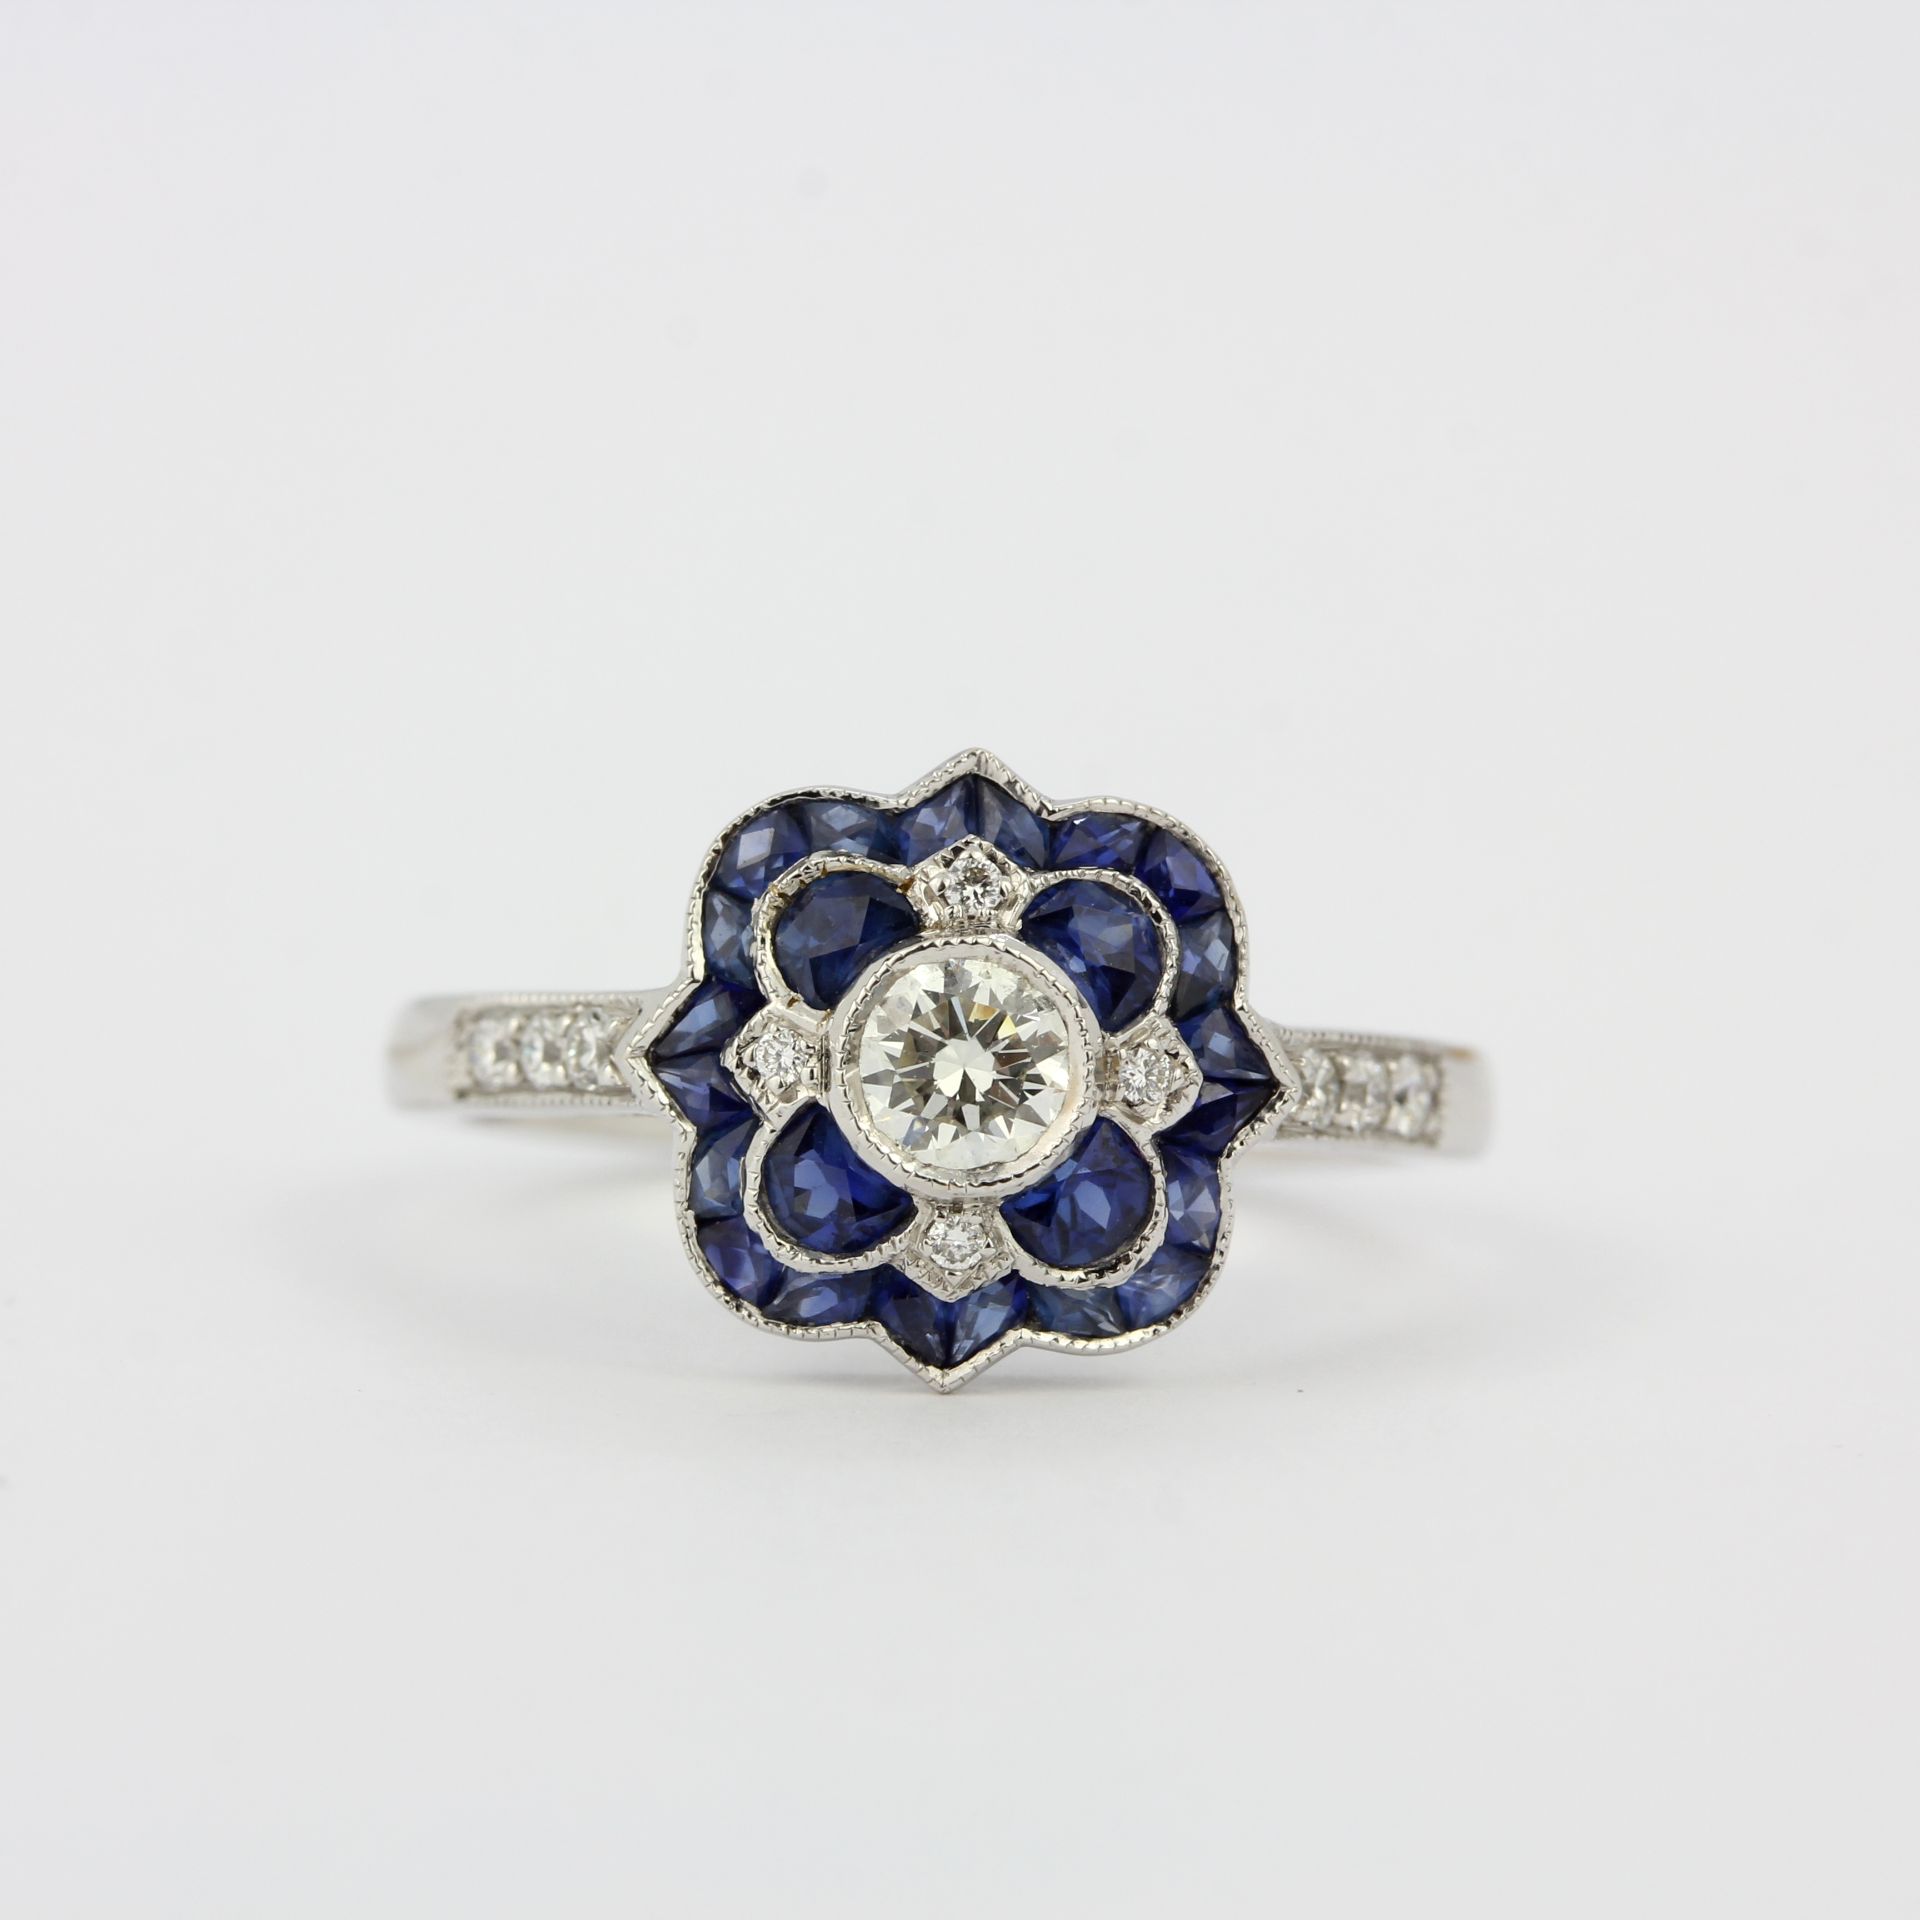 An 18ct white gold Art Deco style ring set with fancy cut sapphires and diamonds, ring size P. - Image 2 of 3